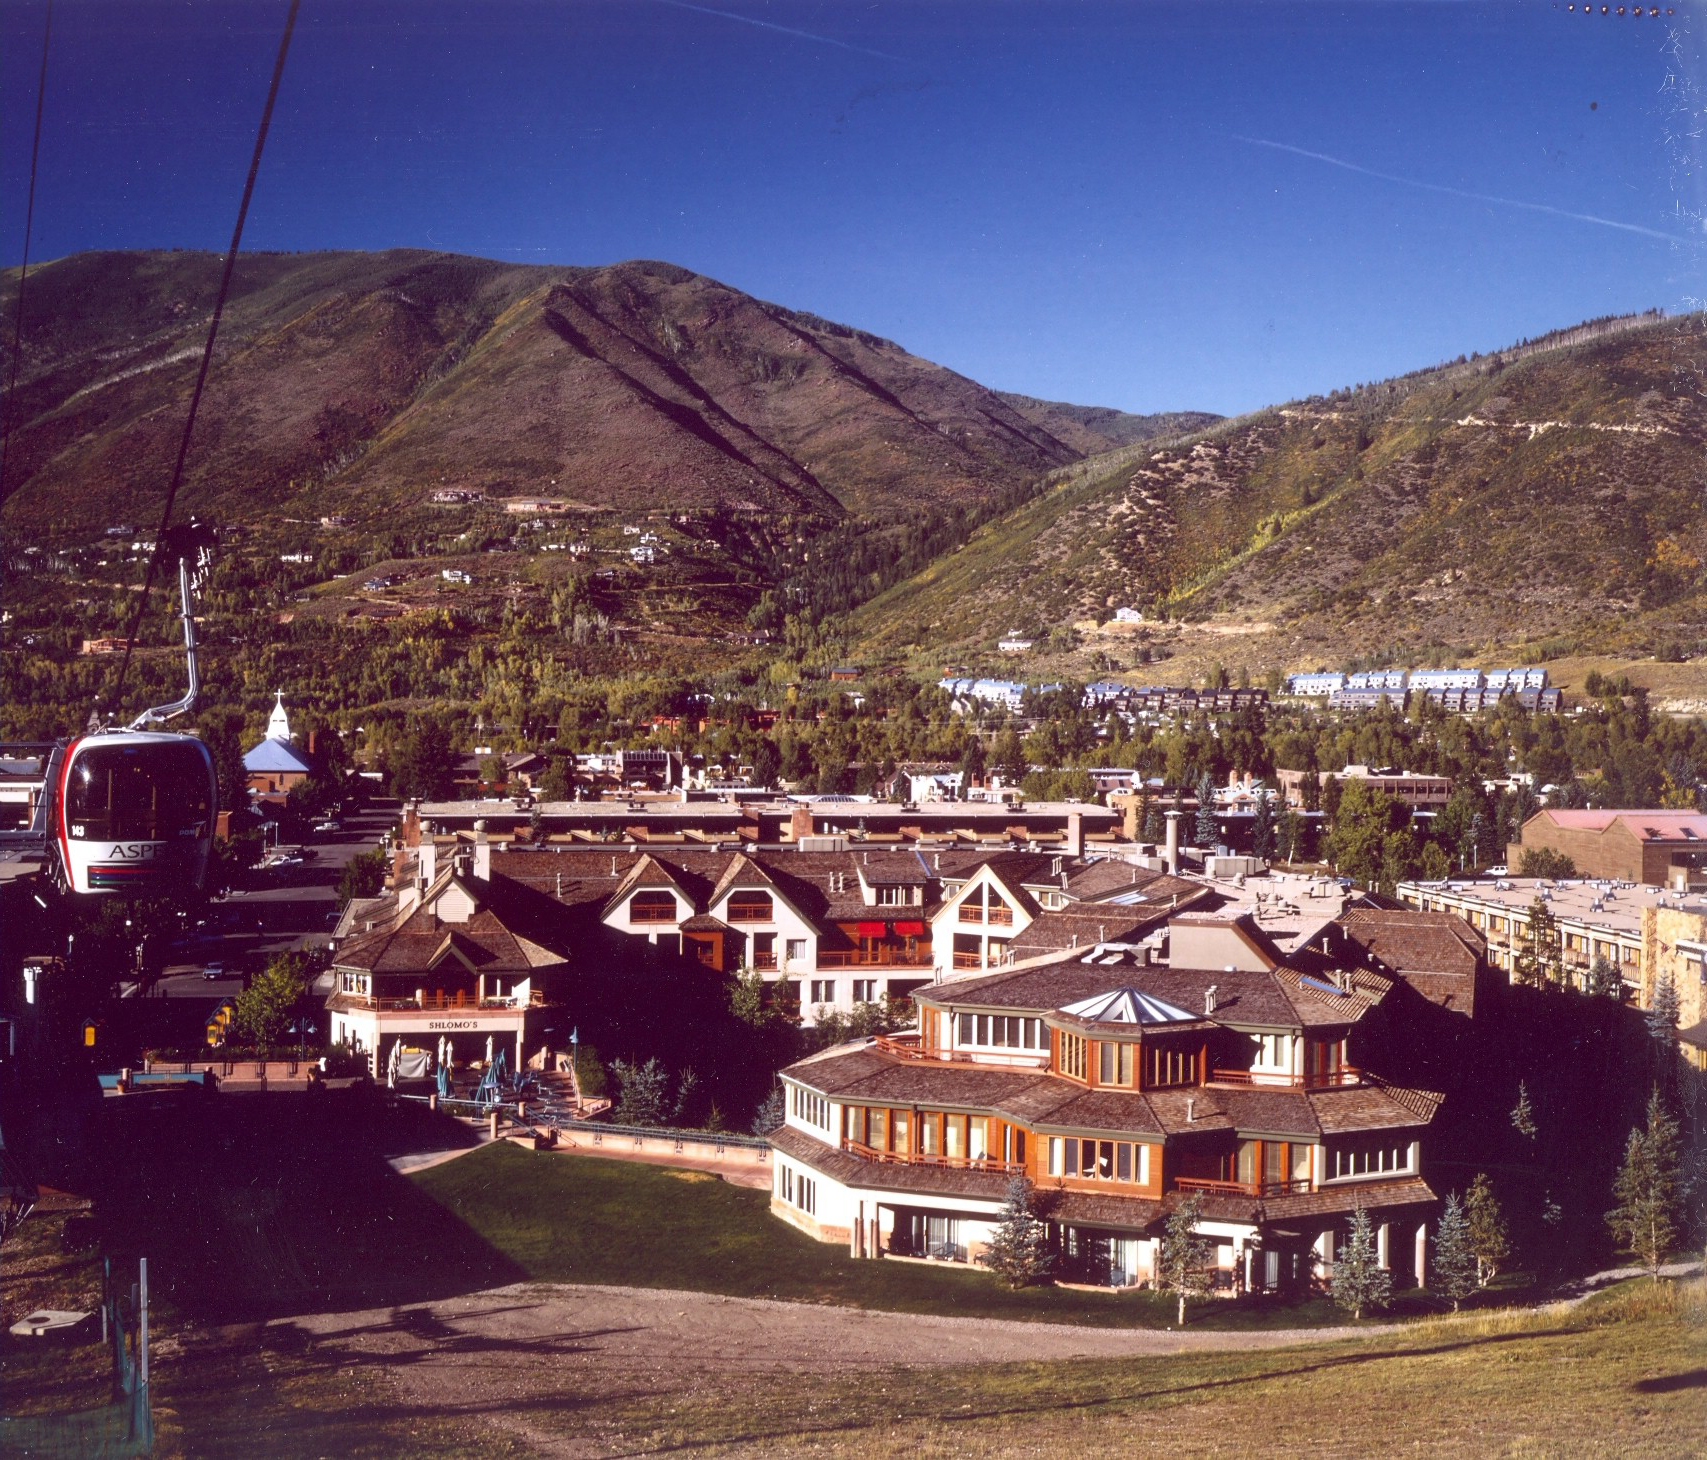 Historical image of The Little Nell in the summer with old gondola.